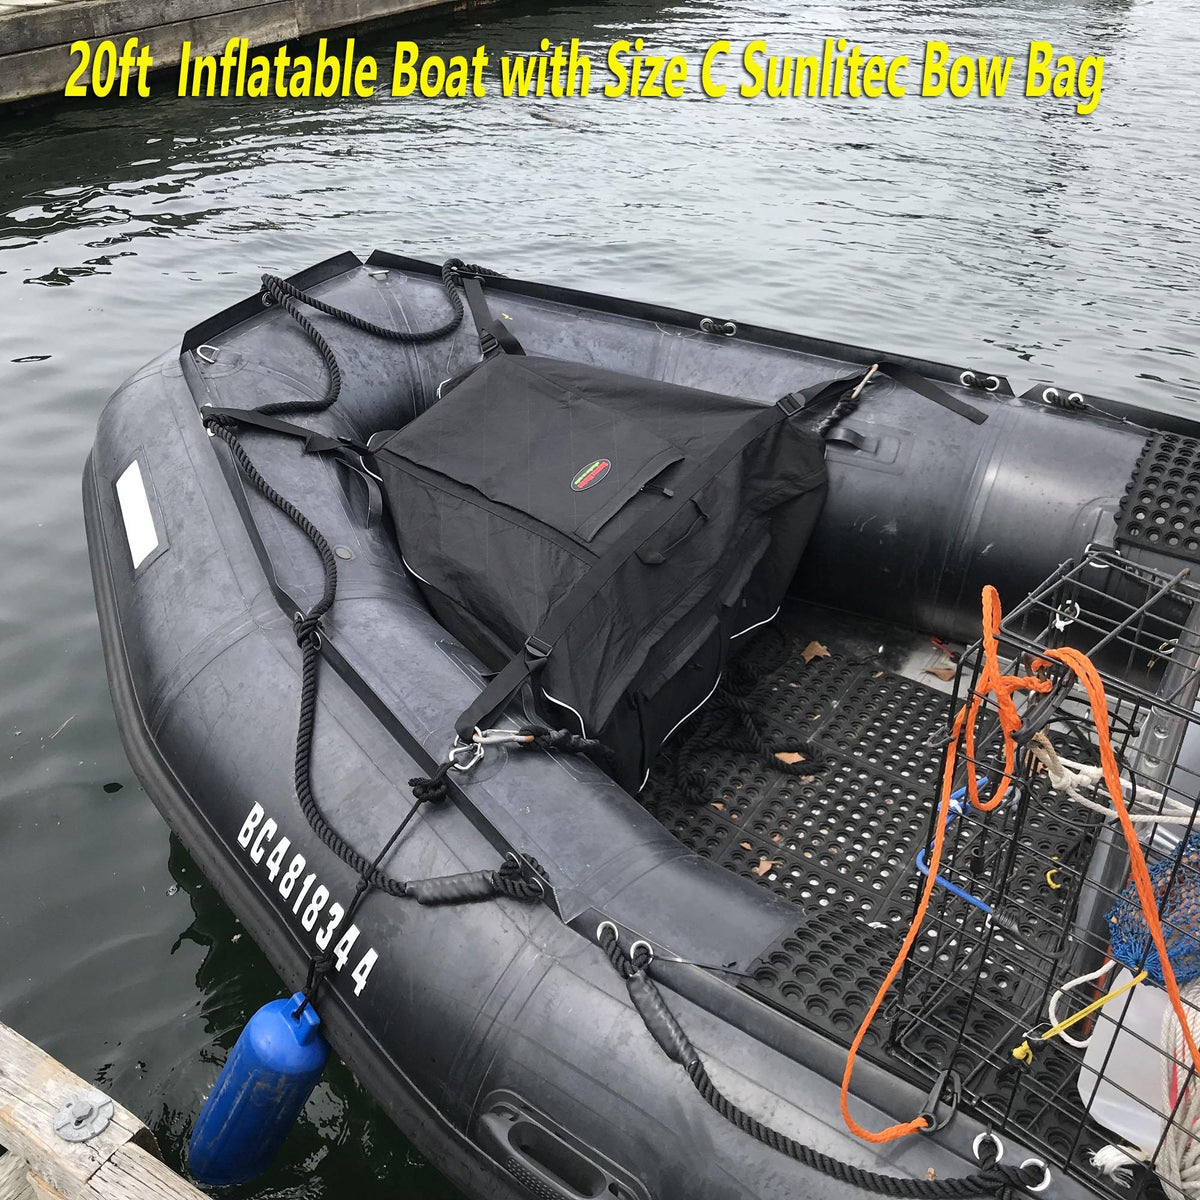 Seamax Universal Foldable Inflatable Boat Hull Storage and Carrying Bag  with Sunlitec Fabric and Reflective Edges - Seamax Marine